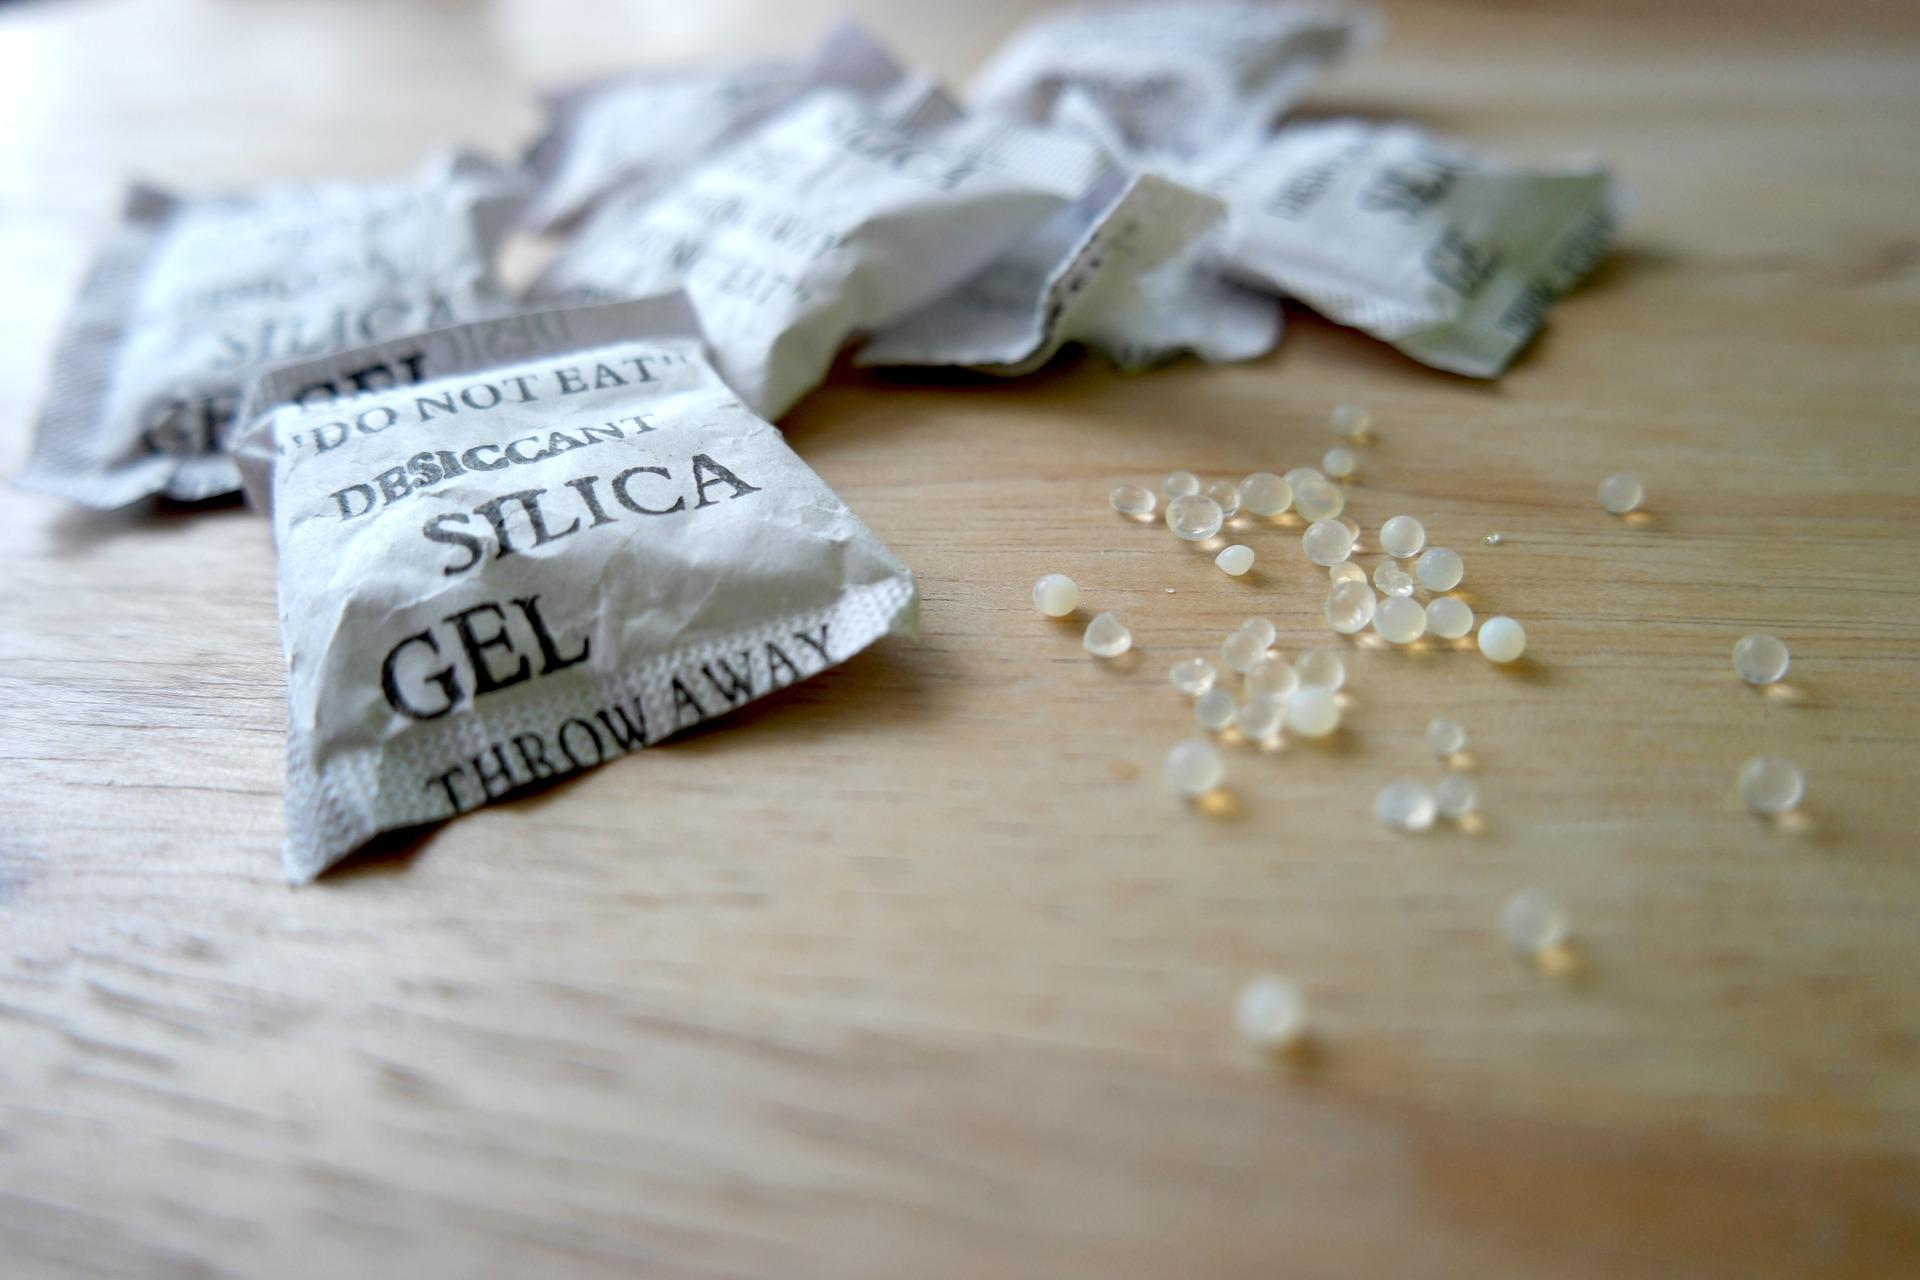 6 uses for silica gel packets around your home